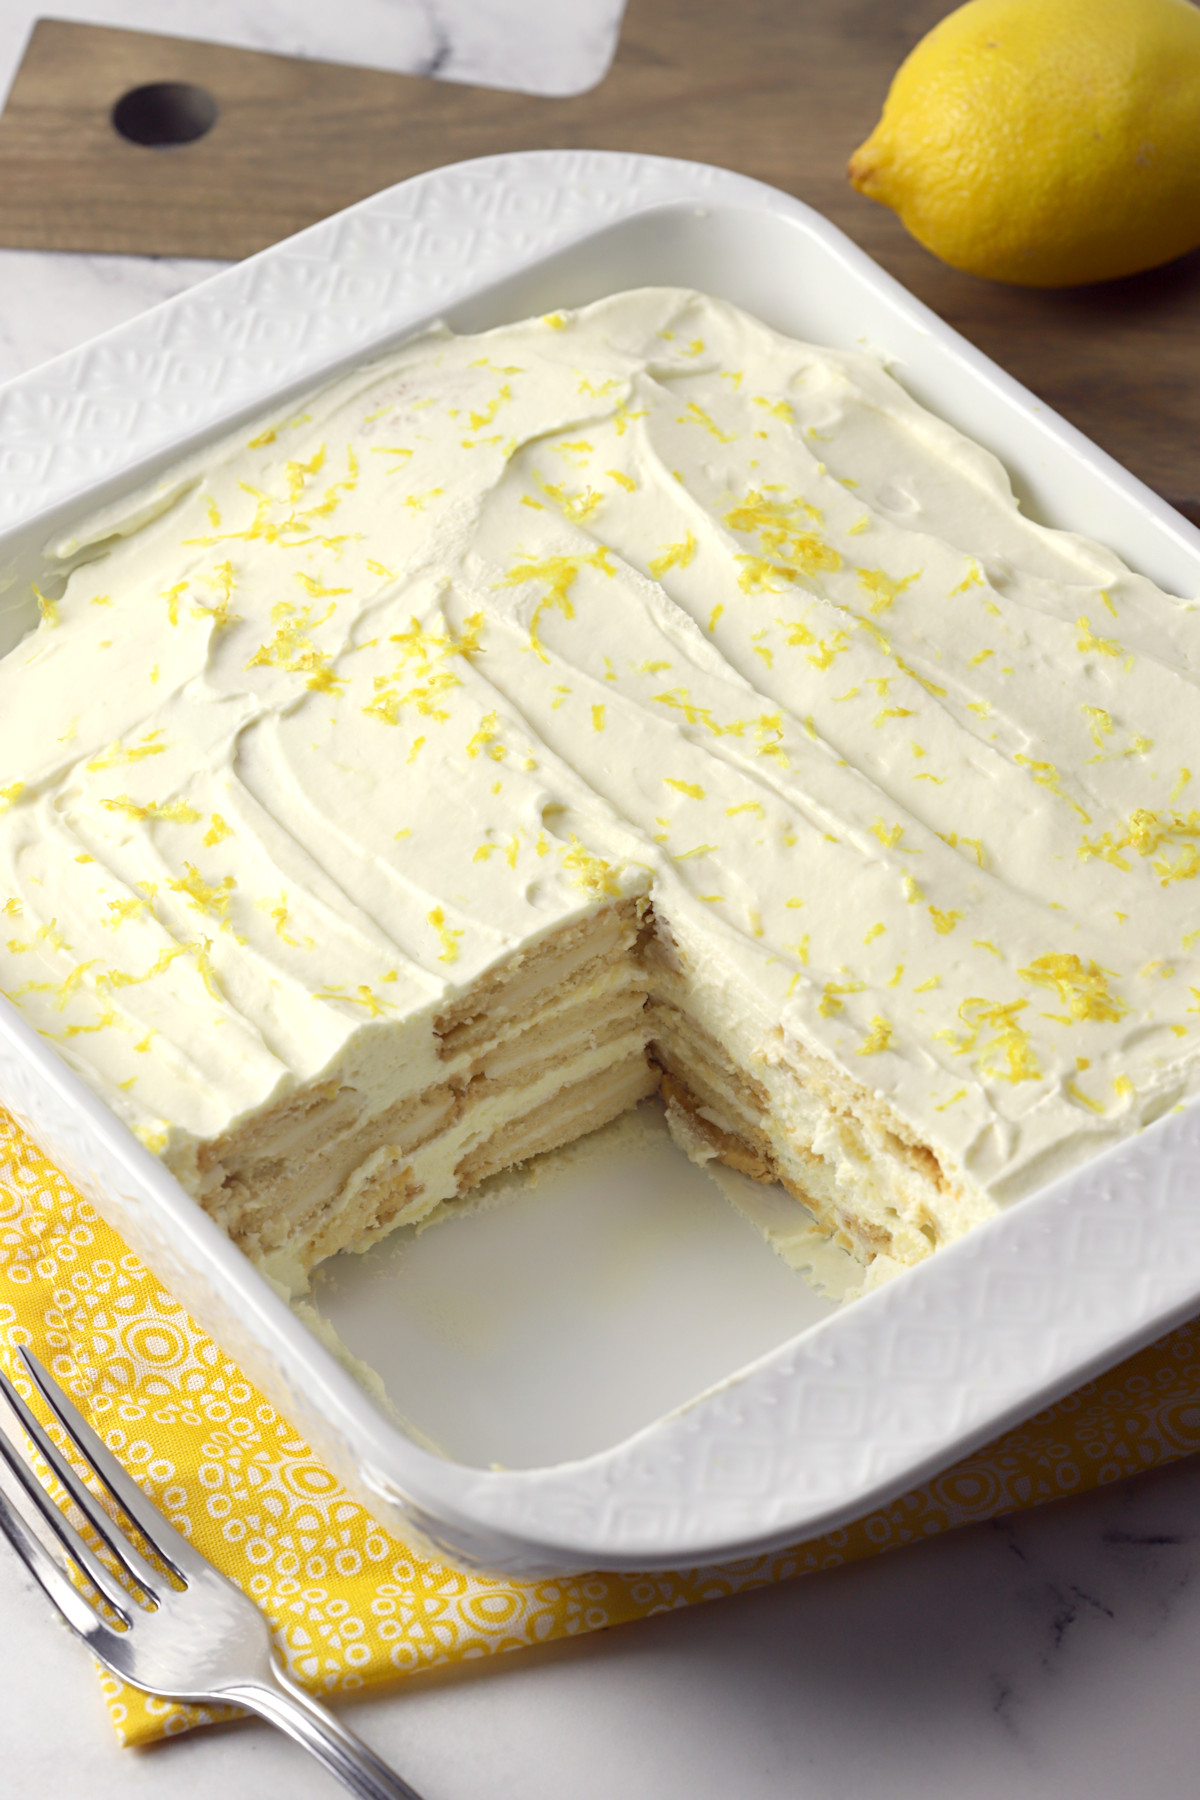 A slice taken from a lemon icebox cake in a white dish.